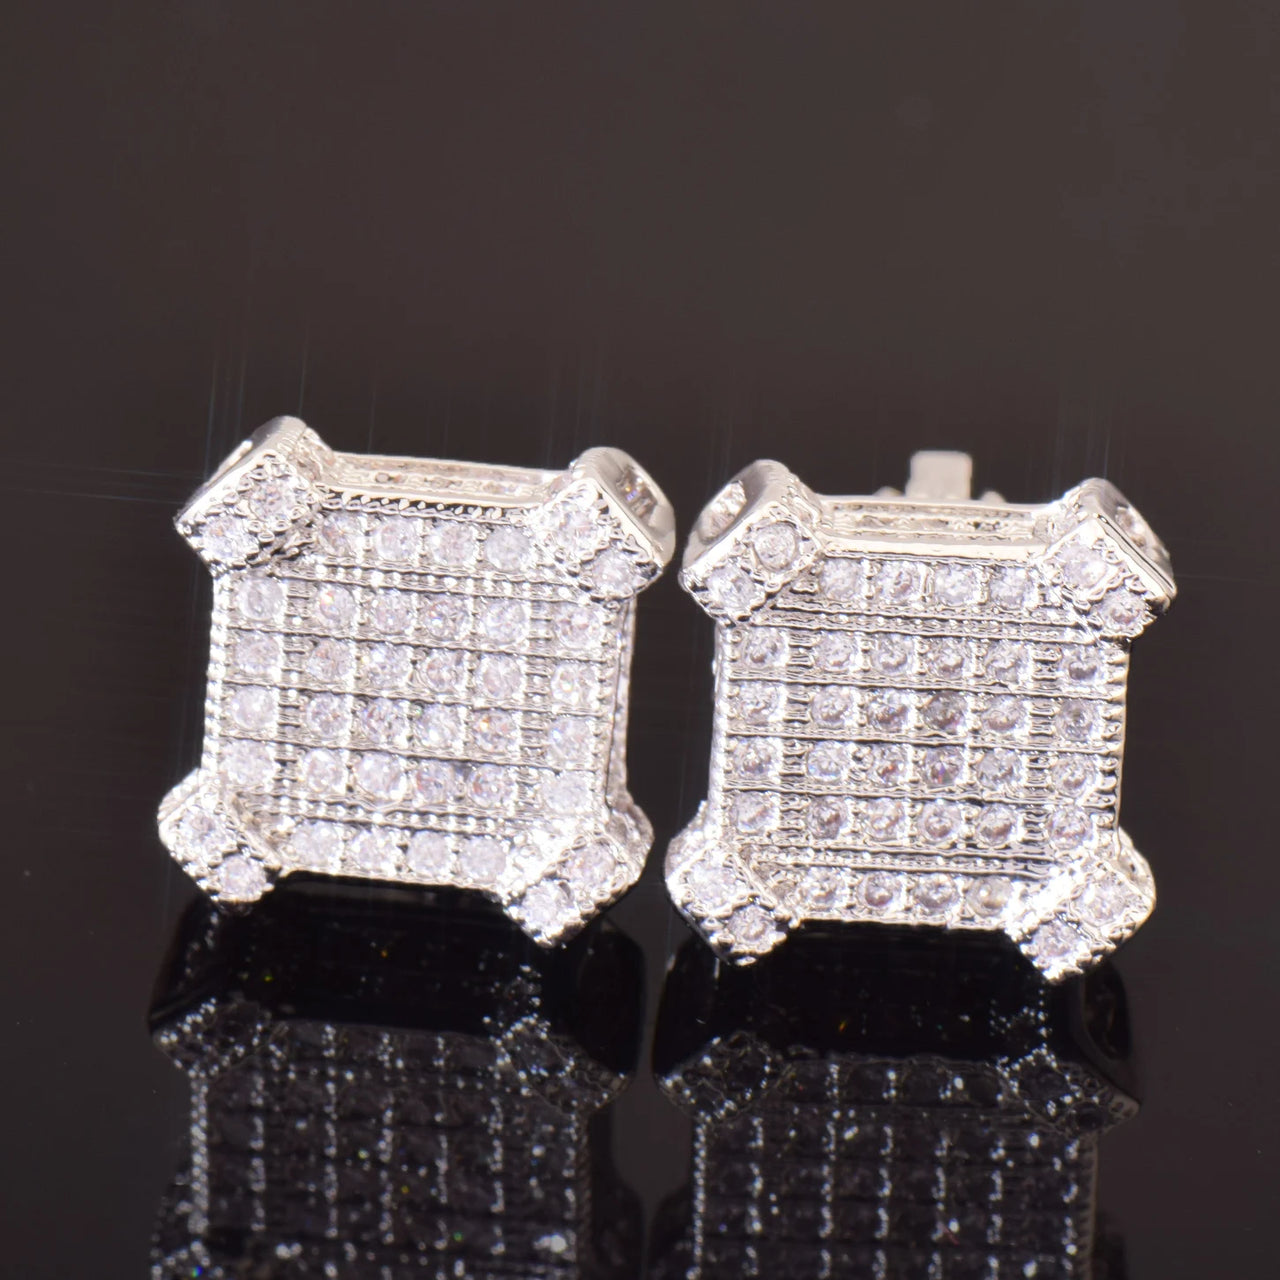 10mm Square Cut Pave Earrings - Different Drips